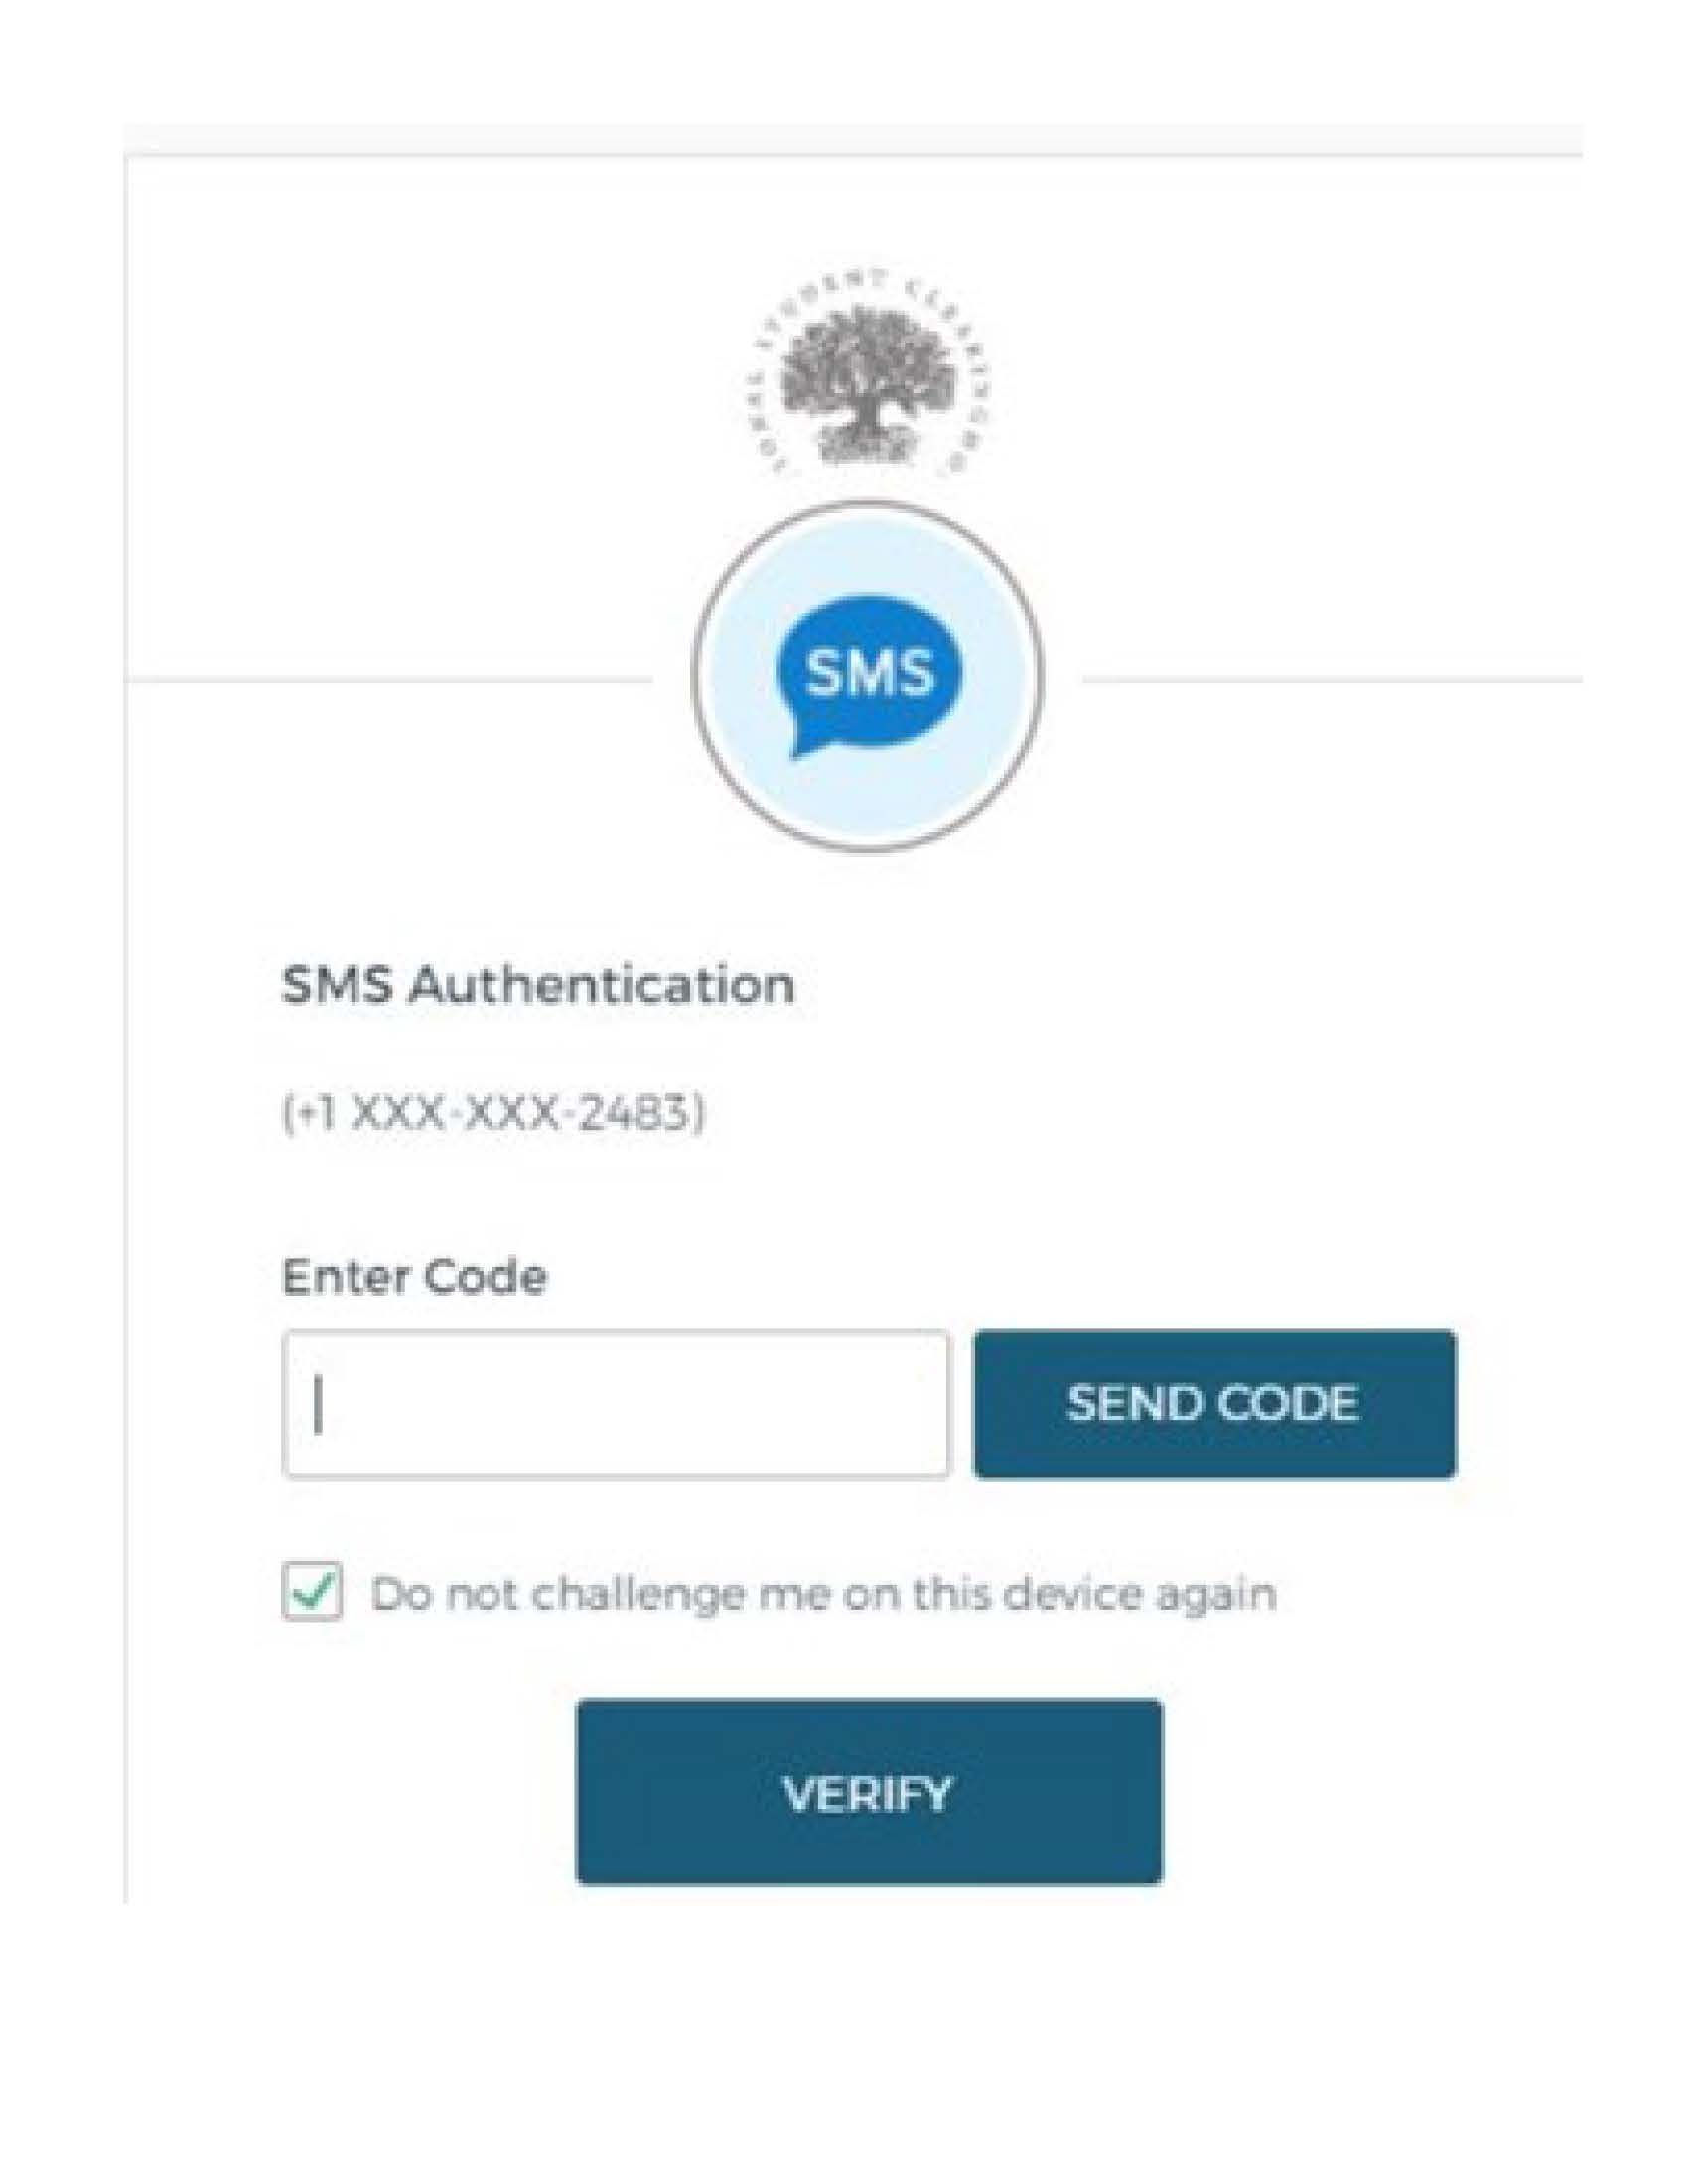 Image - Enter Code to obtaining a SMS Authentication